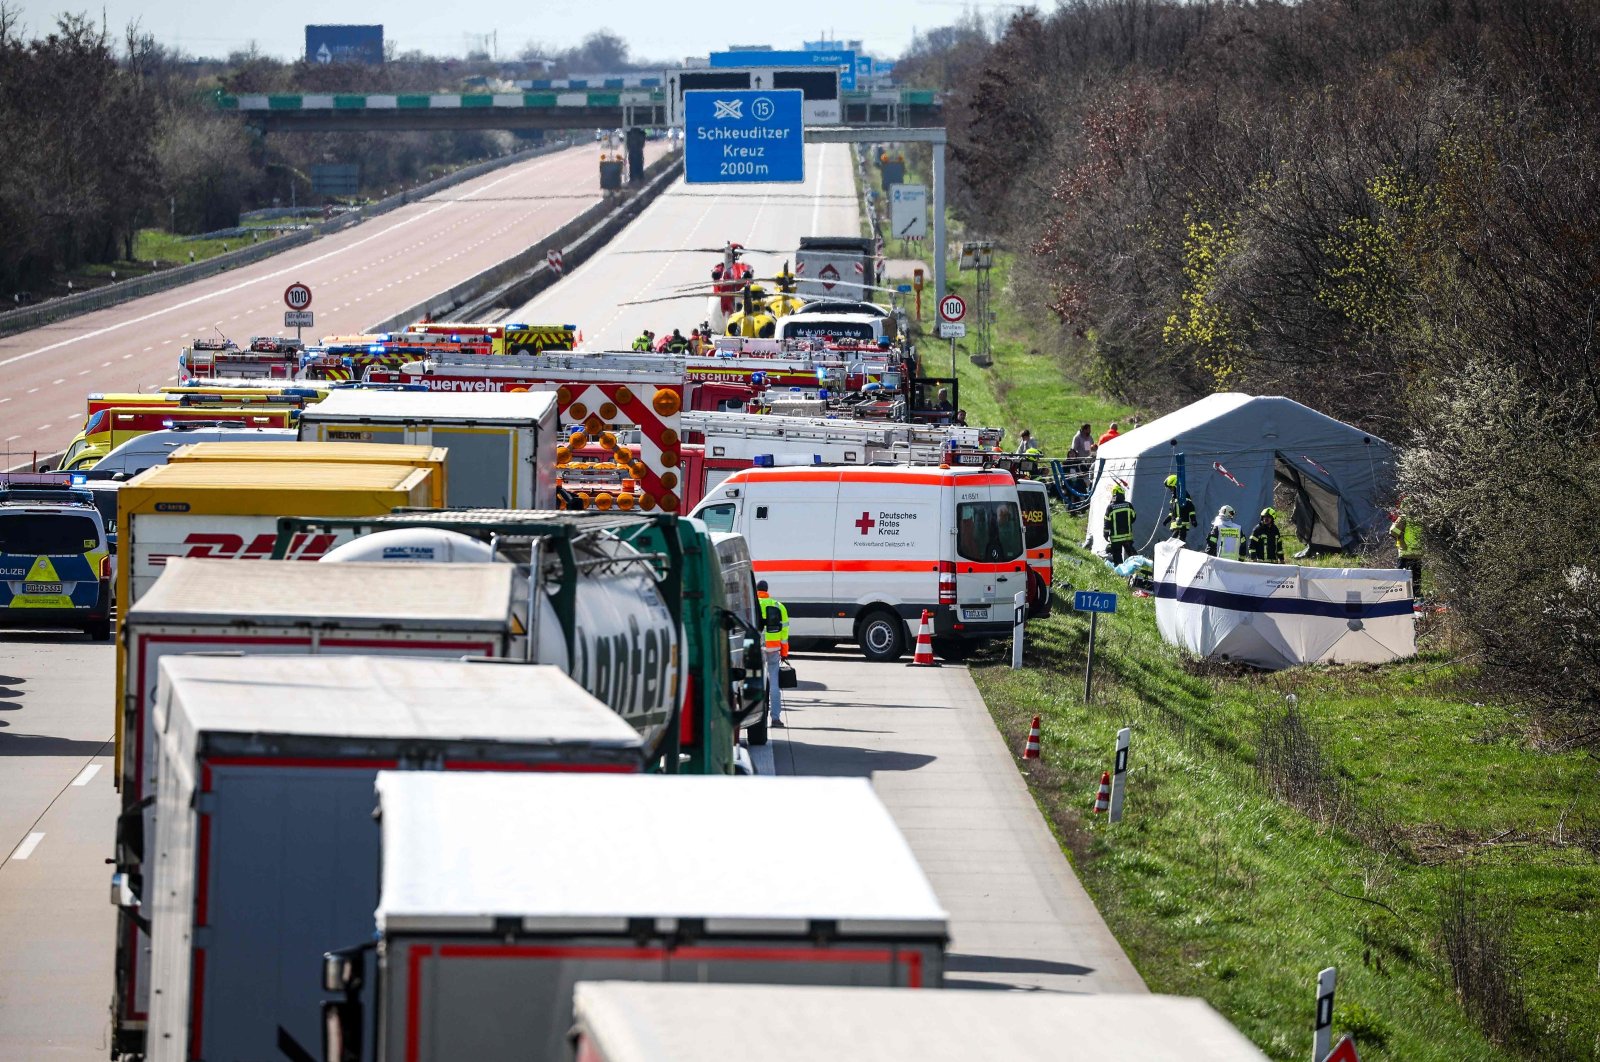 Emergency vehicles and rescue helicopters stand on the A9 highway at the scene of an accident, in Schkeuditz, near Leipzig, eastern Germany, March 27, 2024. (AFP Photo)